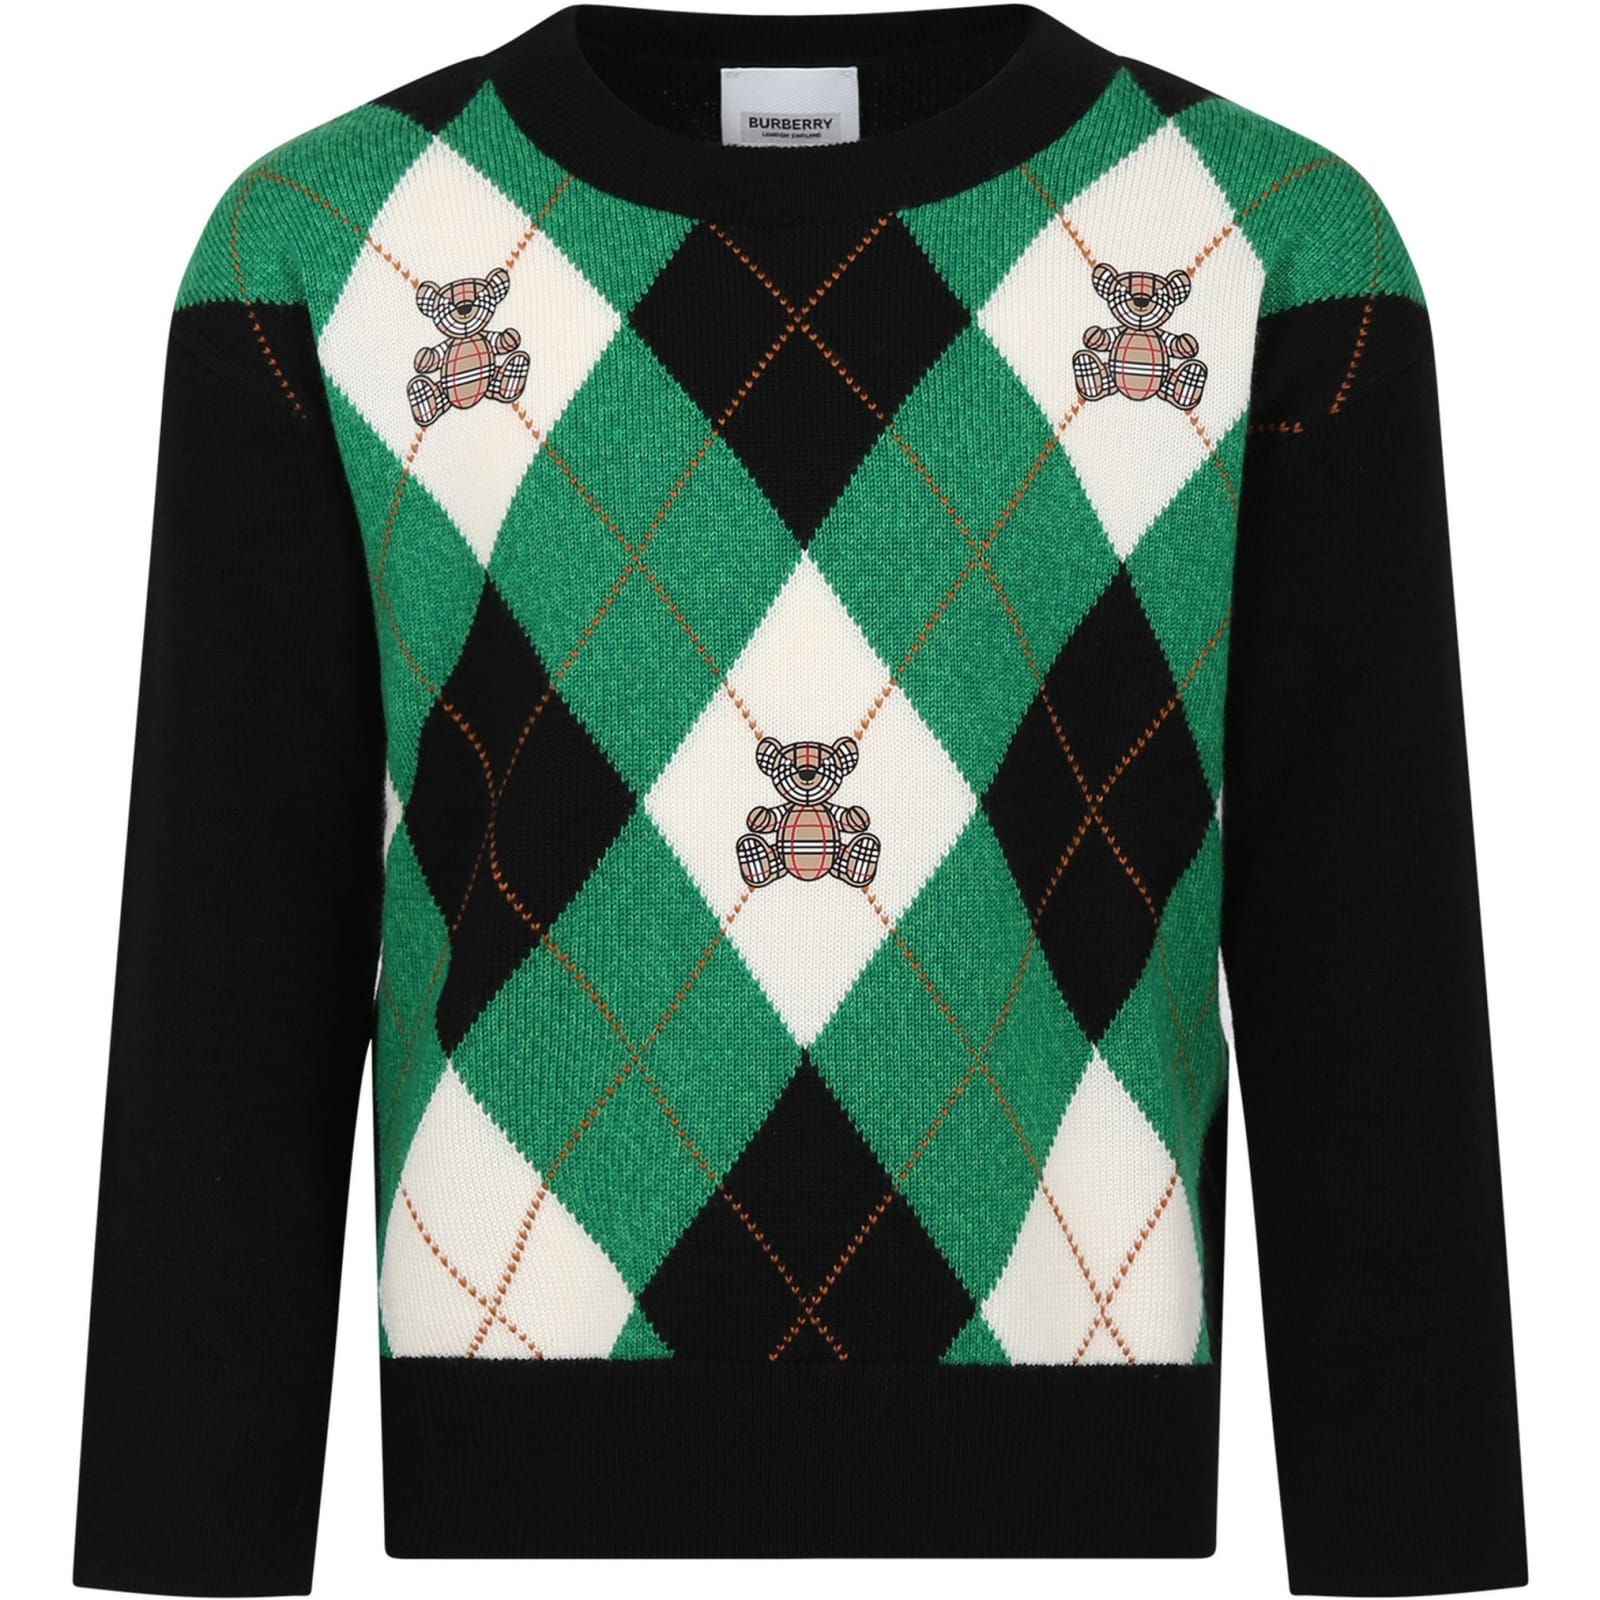 BURBERRY BLACK SWEATER FOR BOY WITH THOMAS BEAR